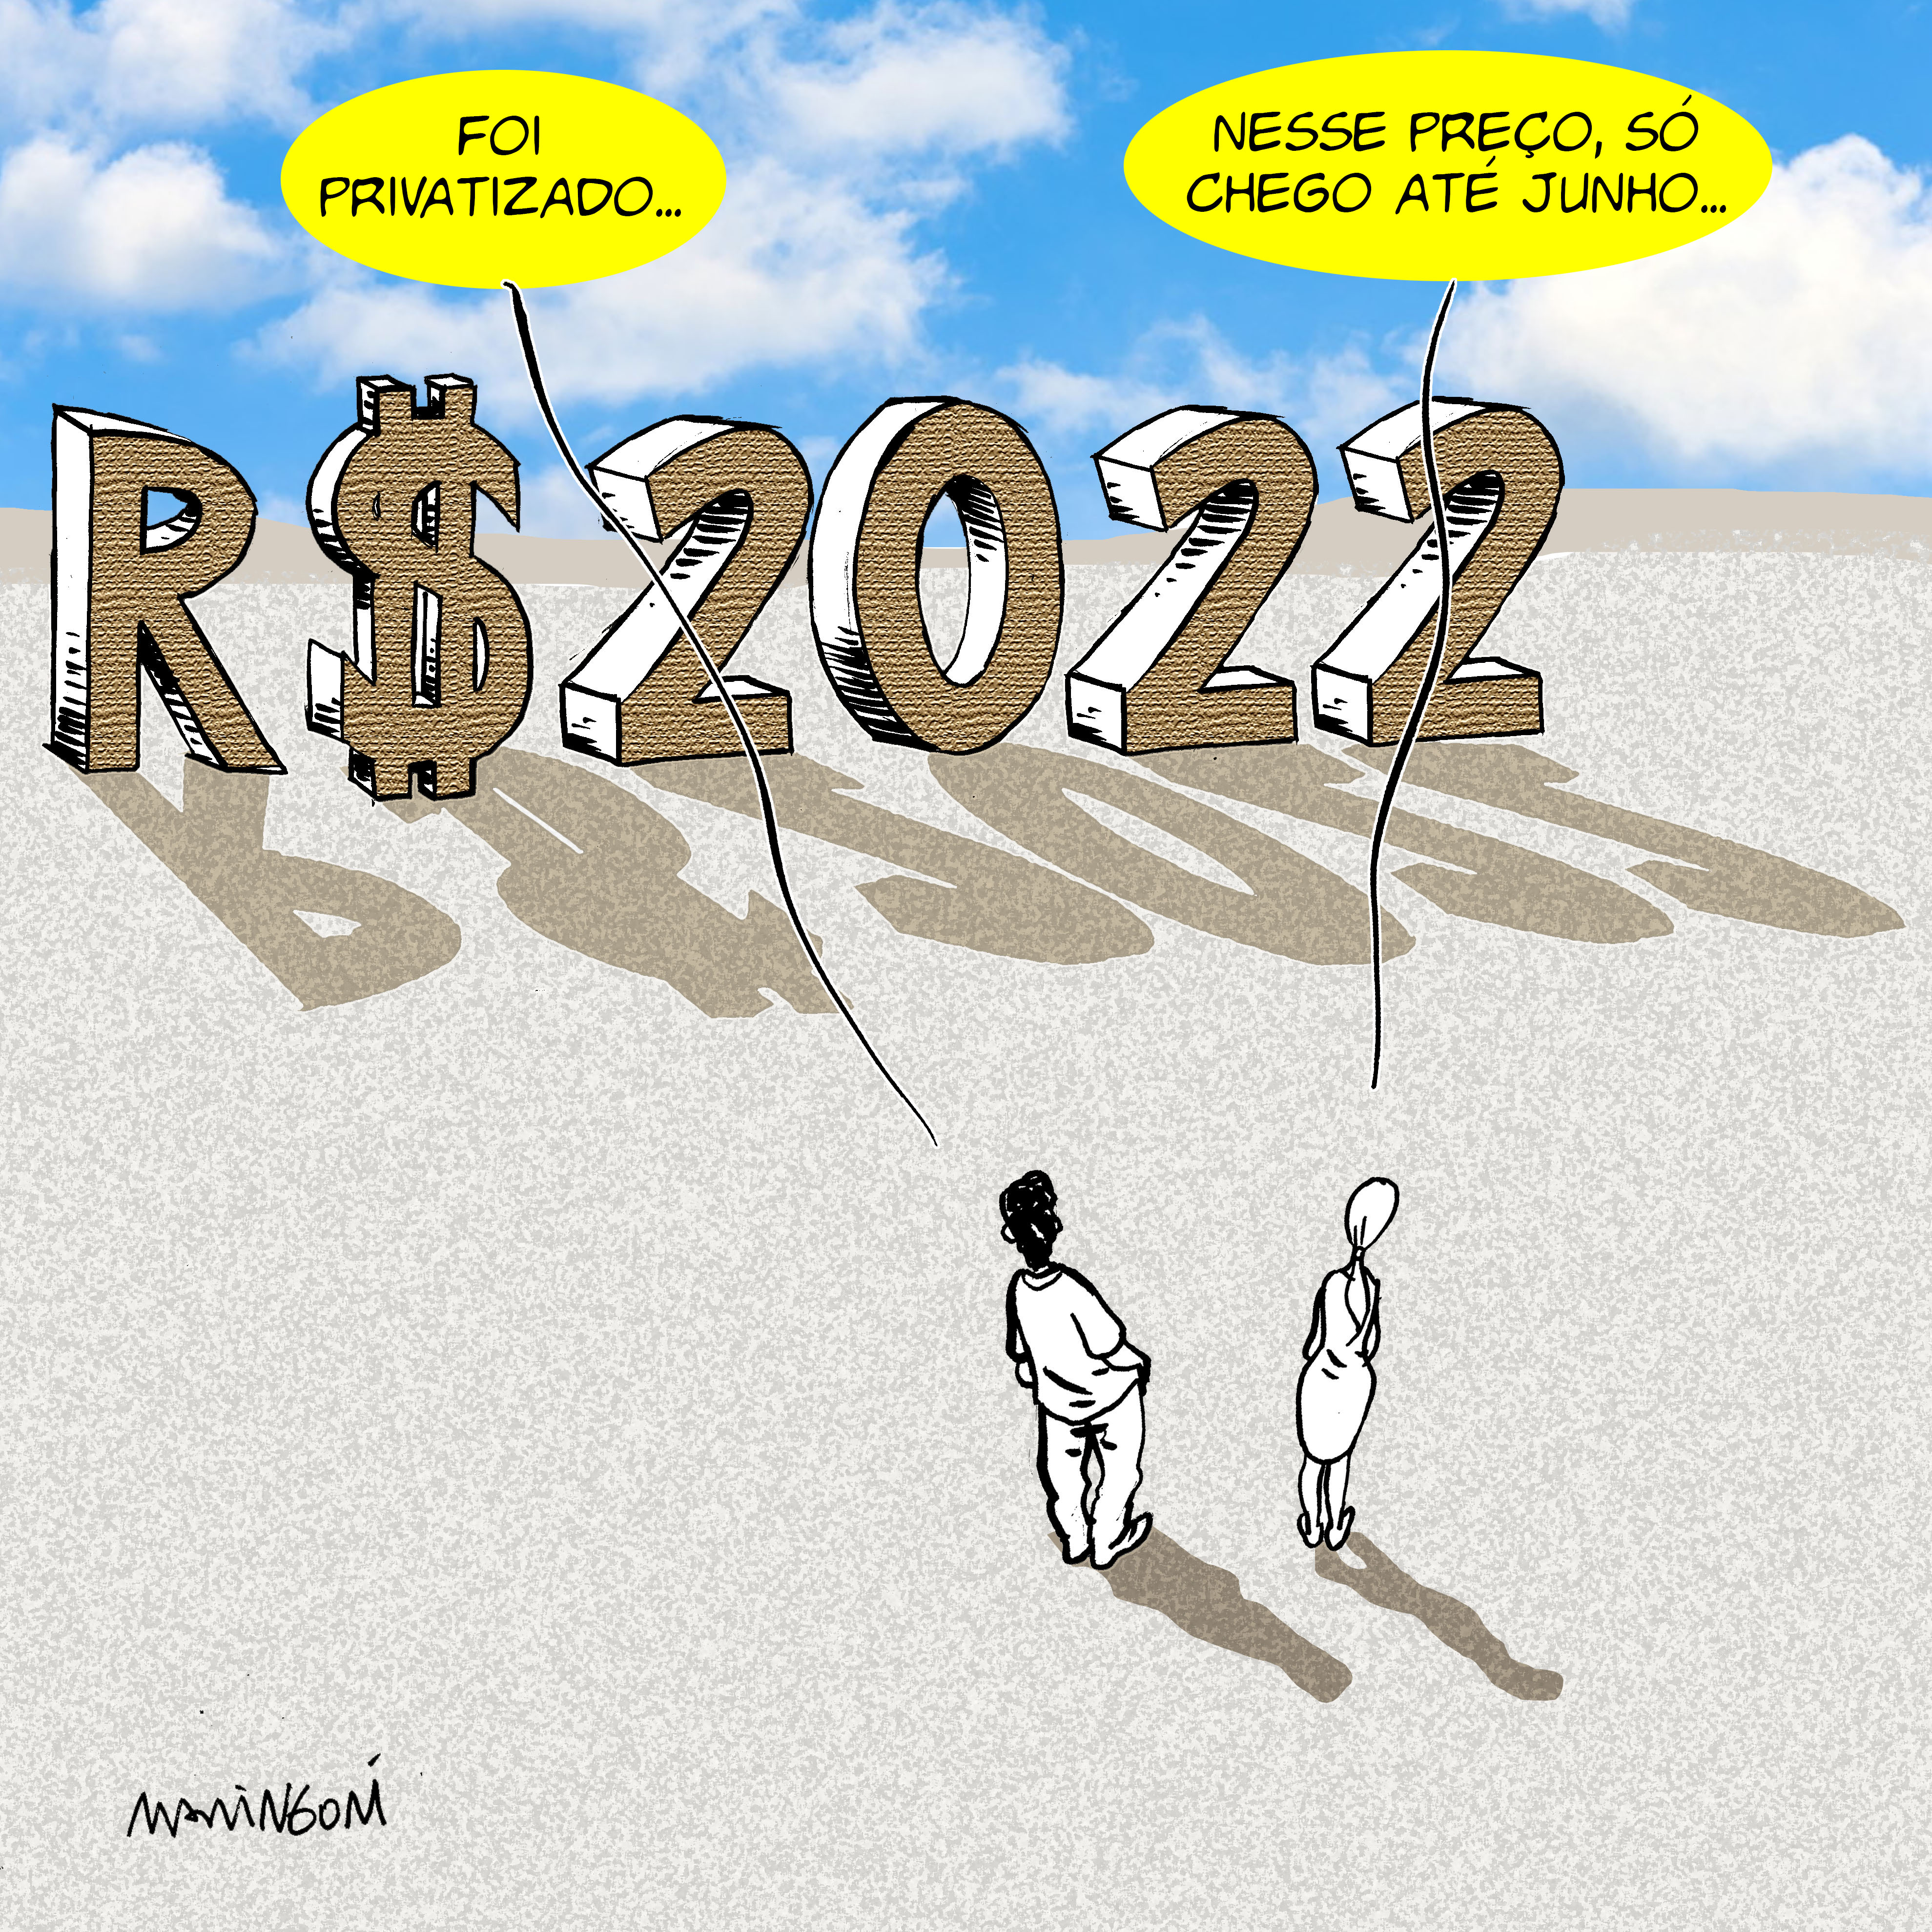 Charge janeiro 2022d